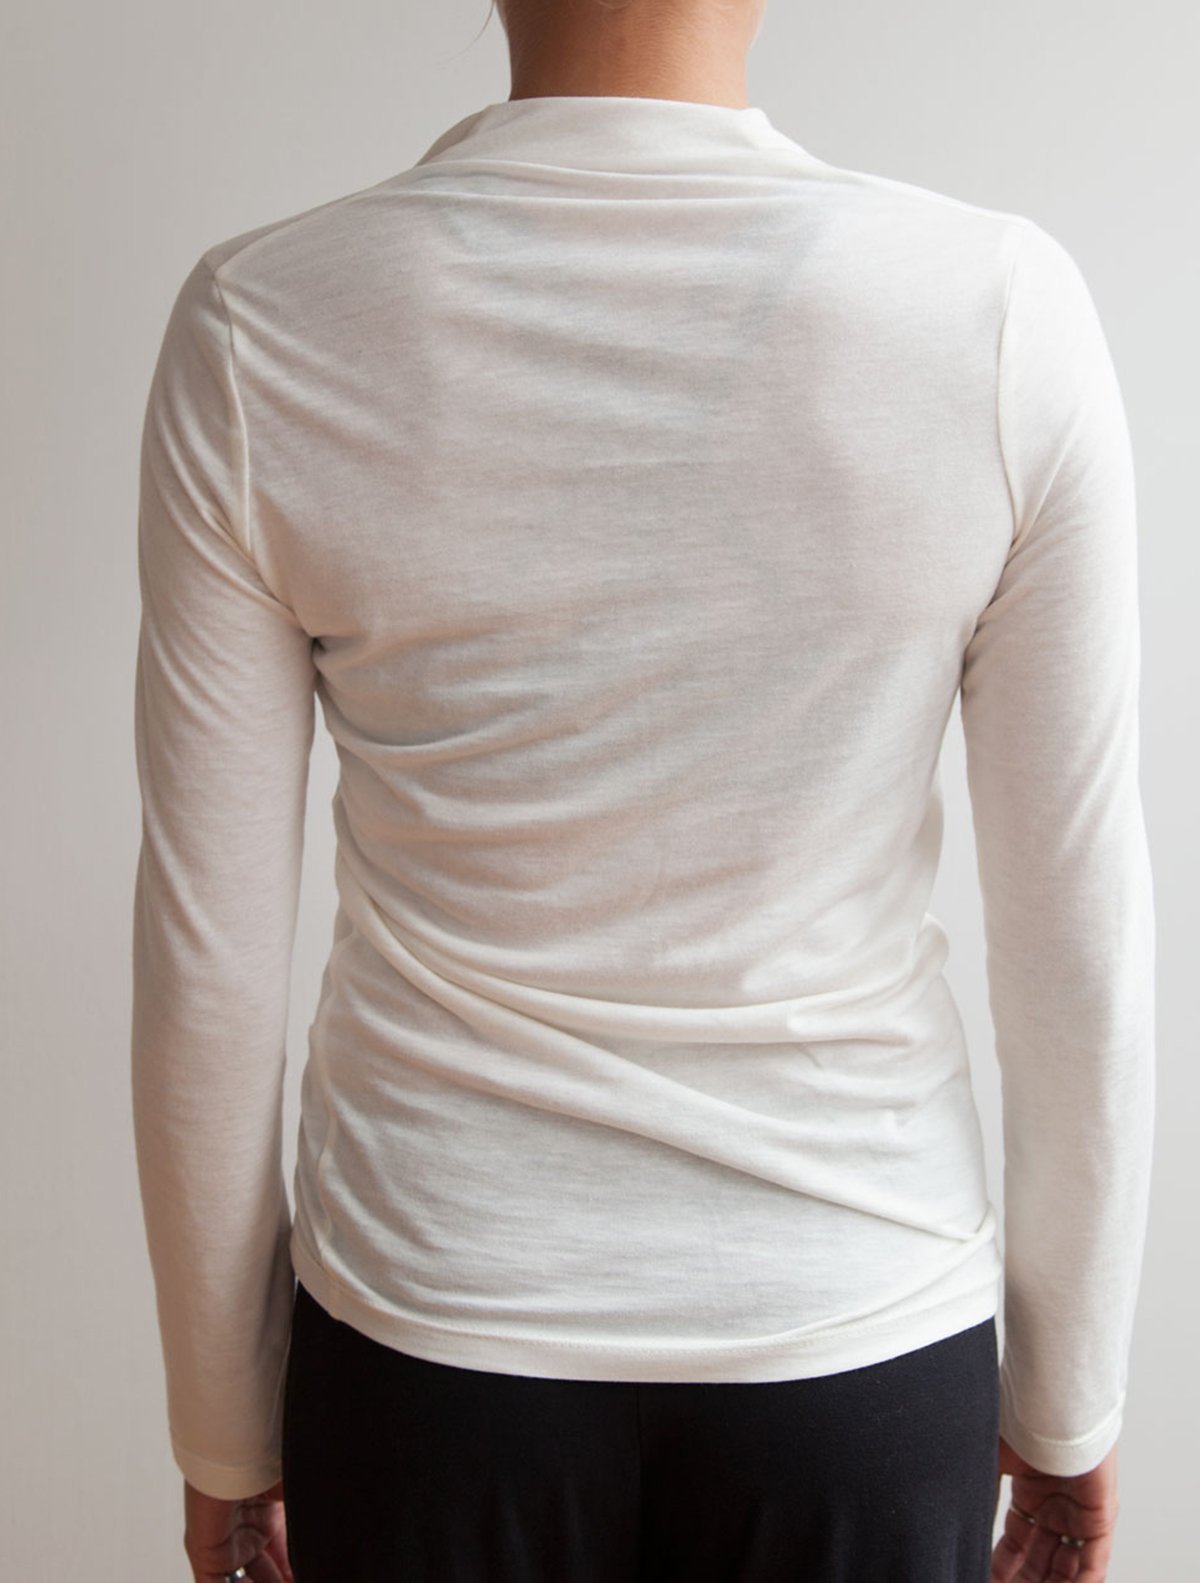 back view of model wearing simulacra's white Long Sleeve Twist Top 